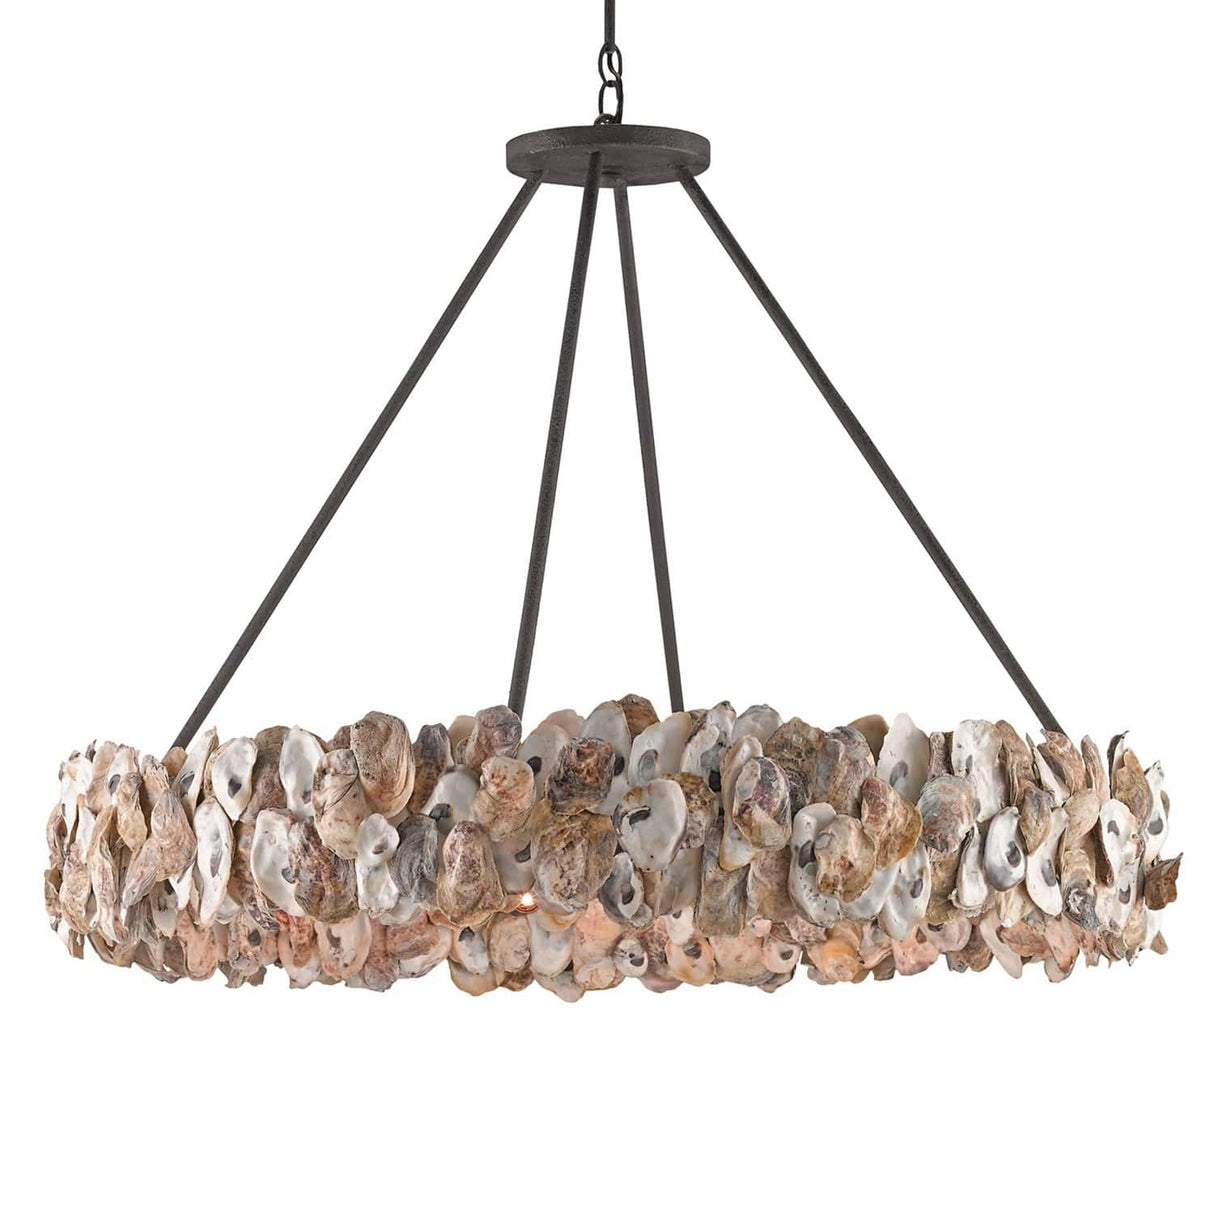 Currey and Company Oyster Circle Chandelier Lighting Currey-Co-9672